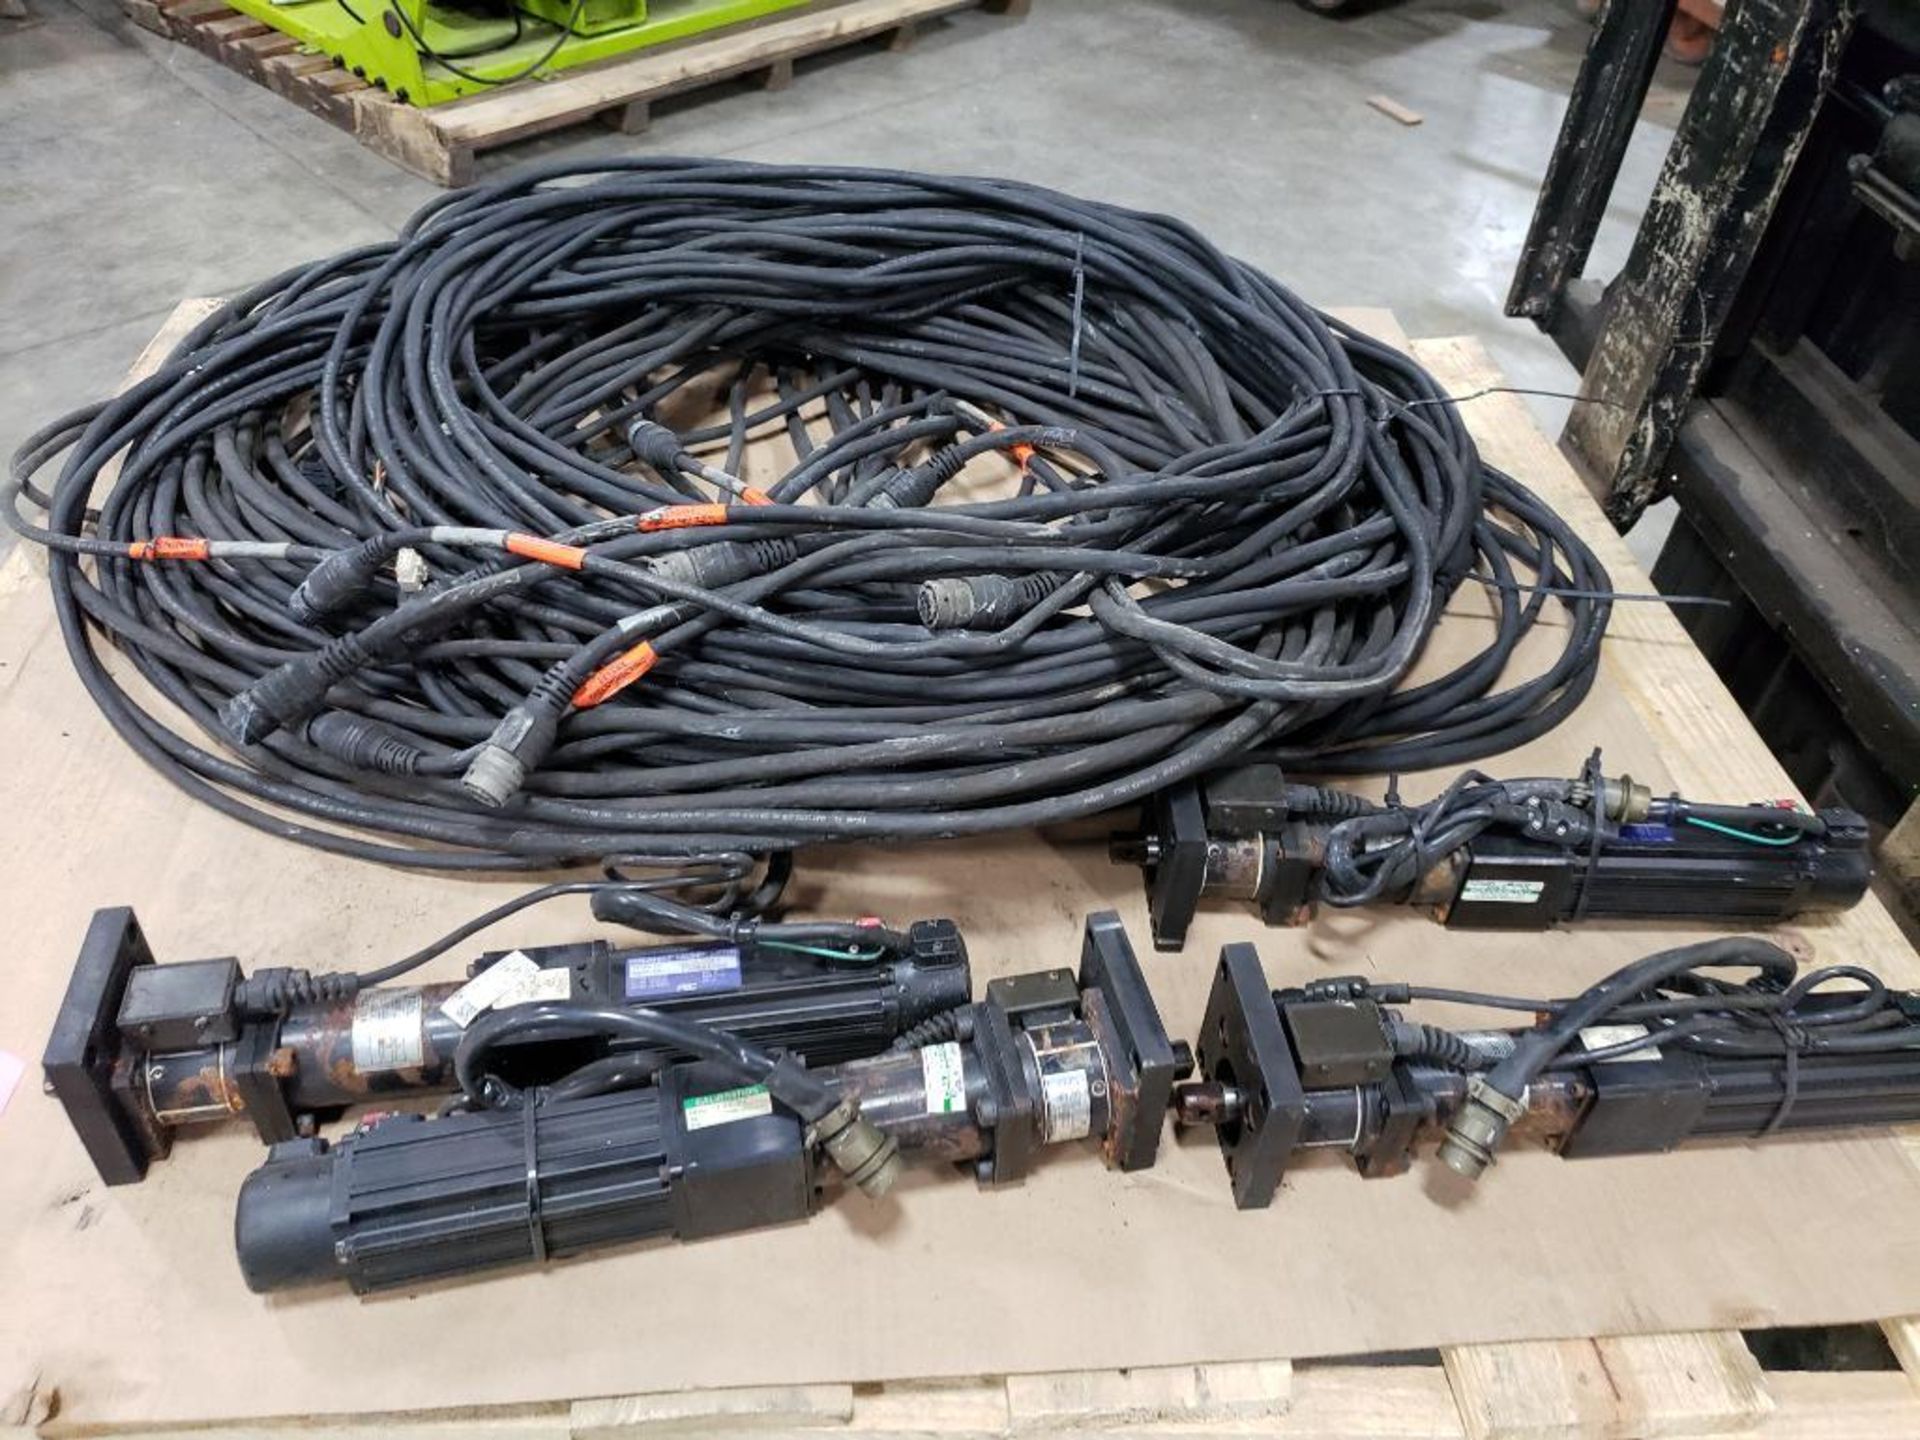 Qty 4 - FEC motorized nut runners NFT-202RM3-S and connection cords. 0.64Nm-Torque. - Image 15 of 16